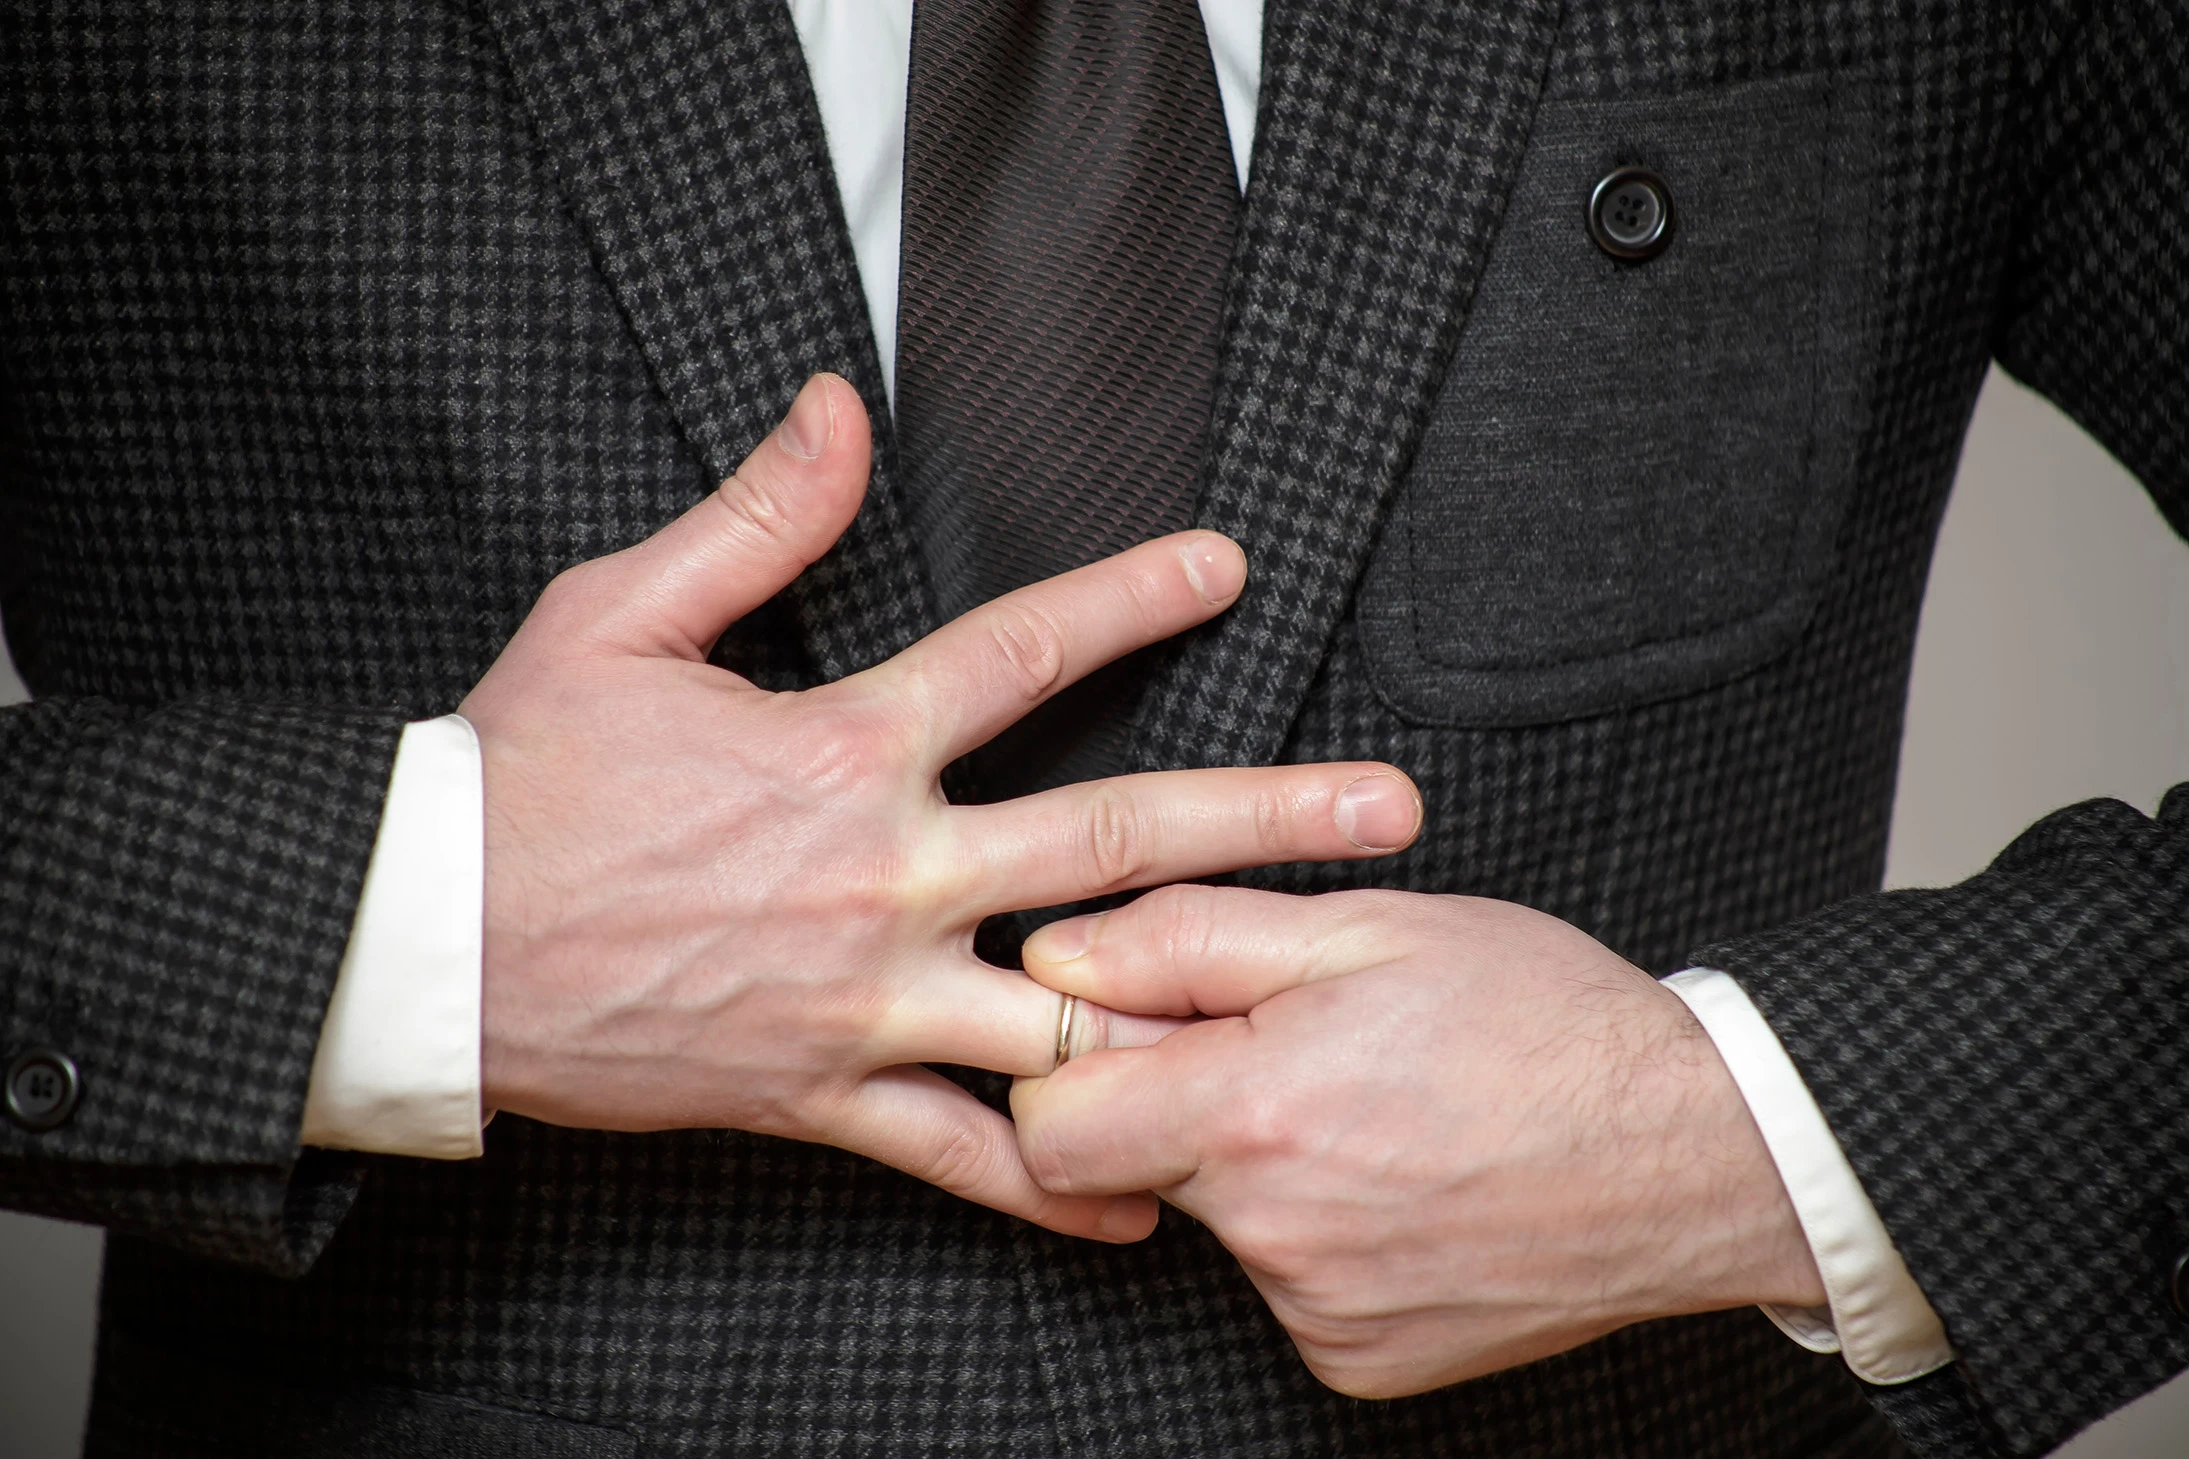 Man in suit removing his wedding ring. If you’re a man going through a divorce, our Houston divorce attorneys for men are here to guide and support you.